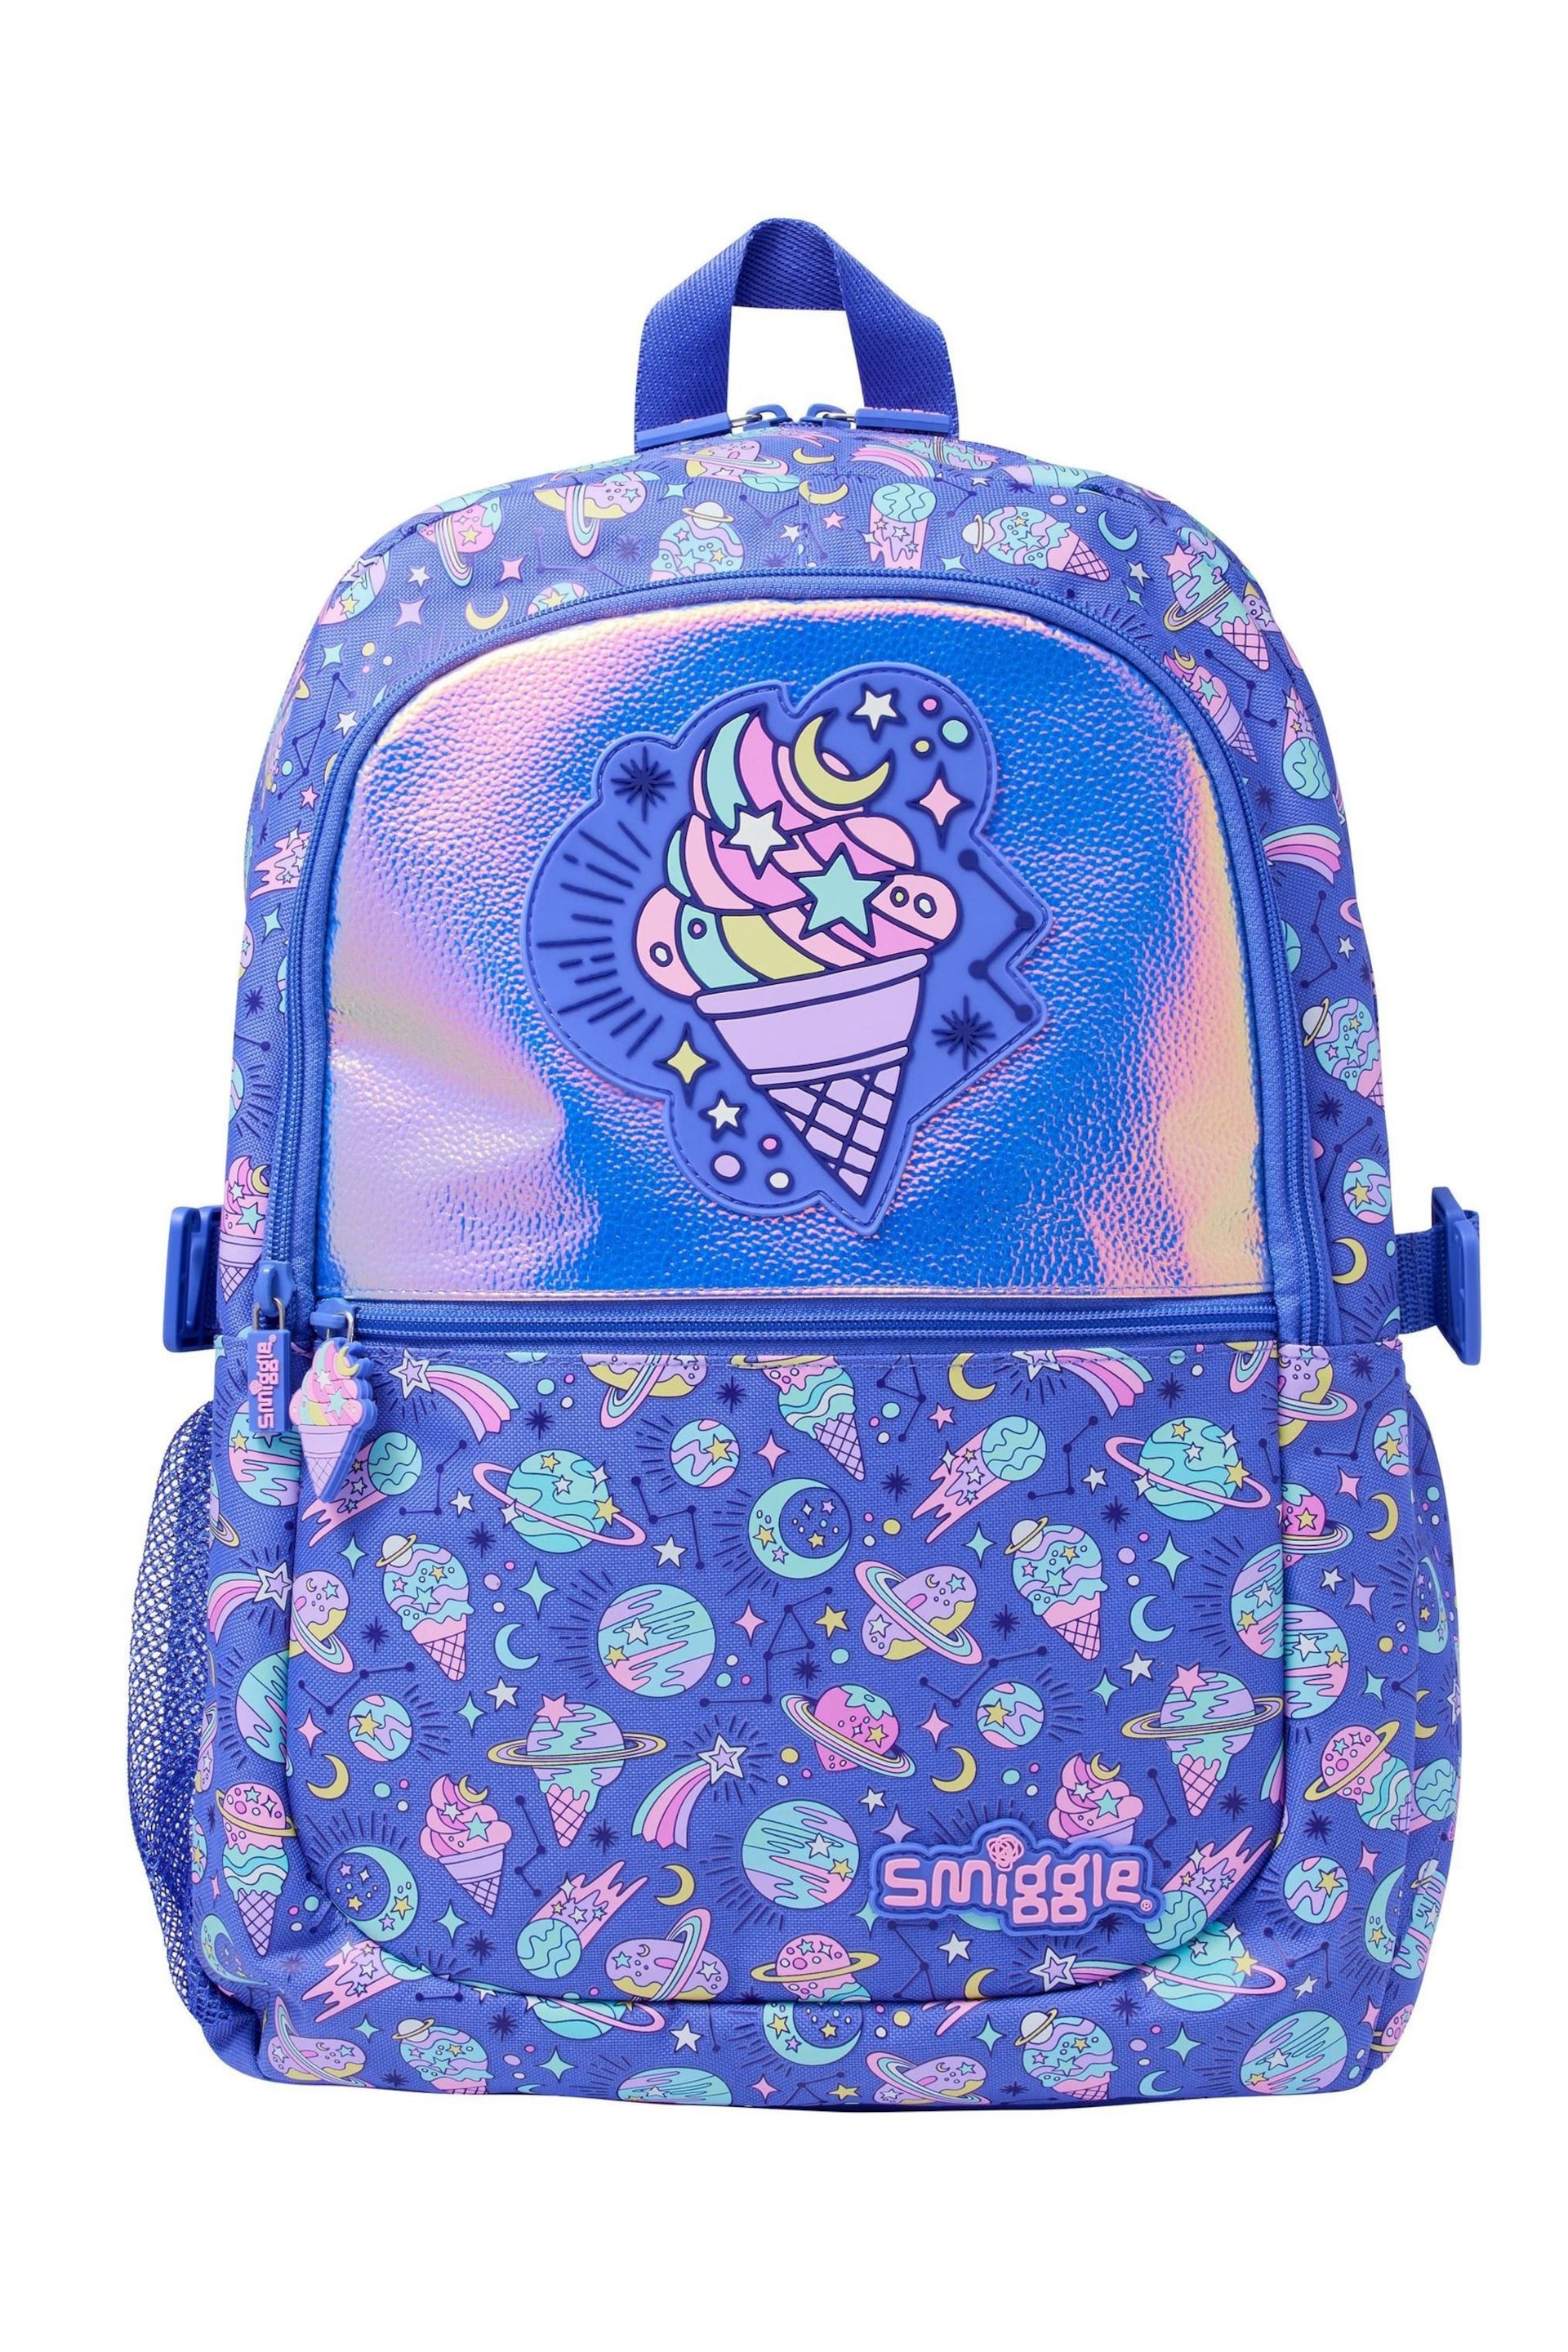 Smiggle Purple Epic Adventures Classic Attach Backpack - Image 5 of 7